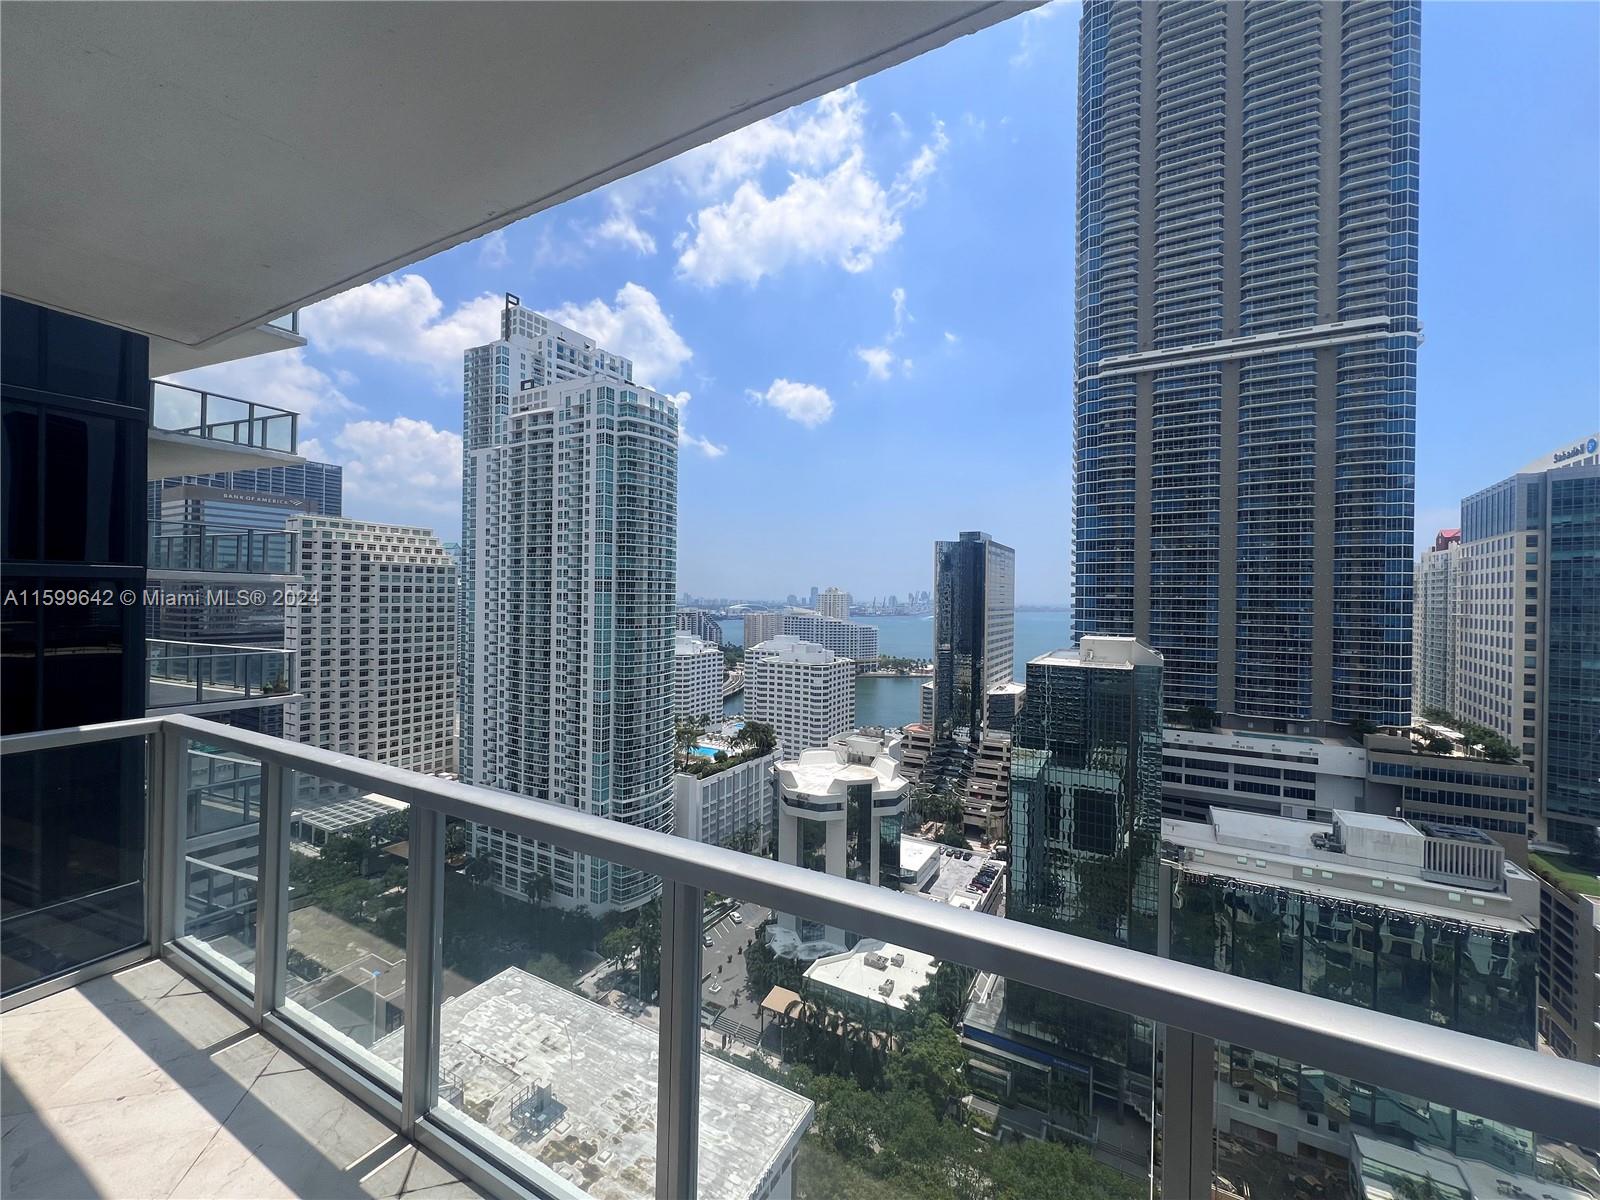 Large 1 bedroom 1 bathroom, corner unit with direct bay views and 1 assigned parking!!!! in the heart of Brickell next to restaurants, shopping center, and bars. Easy to show!!!!